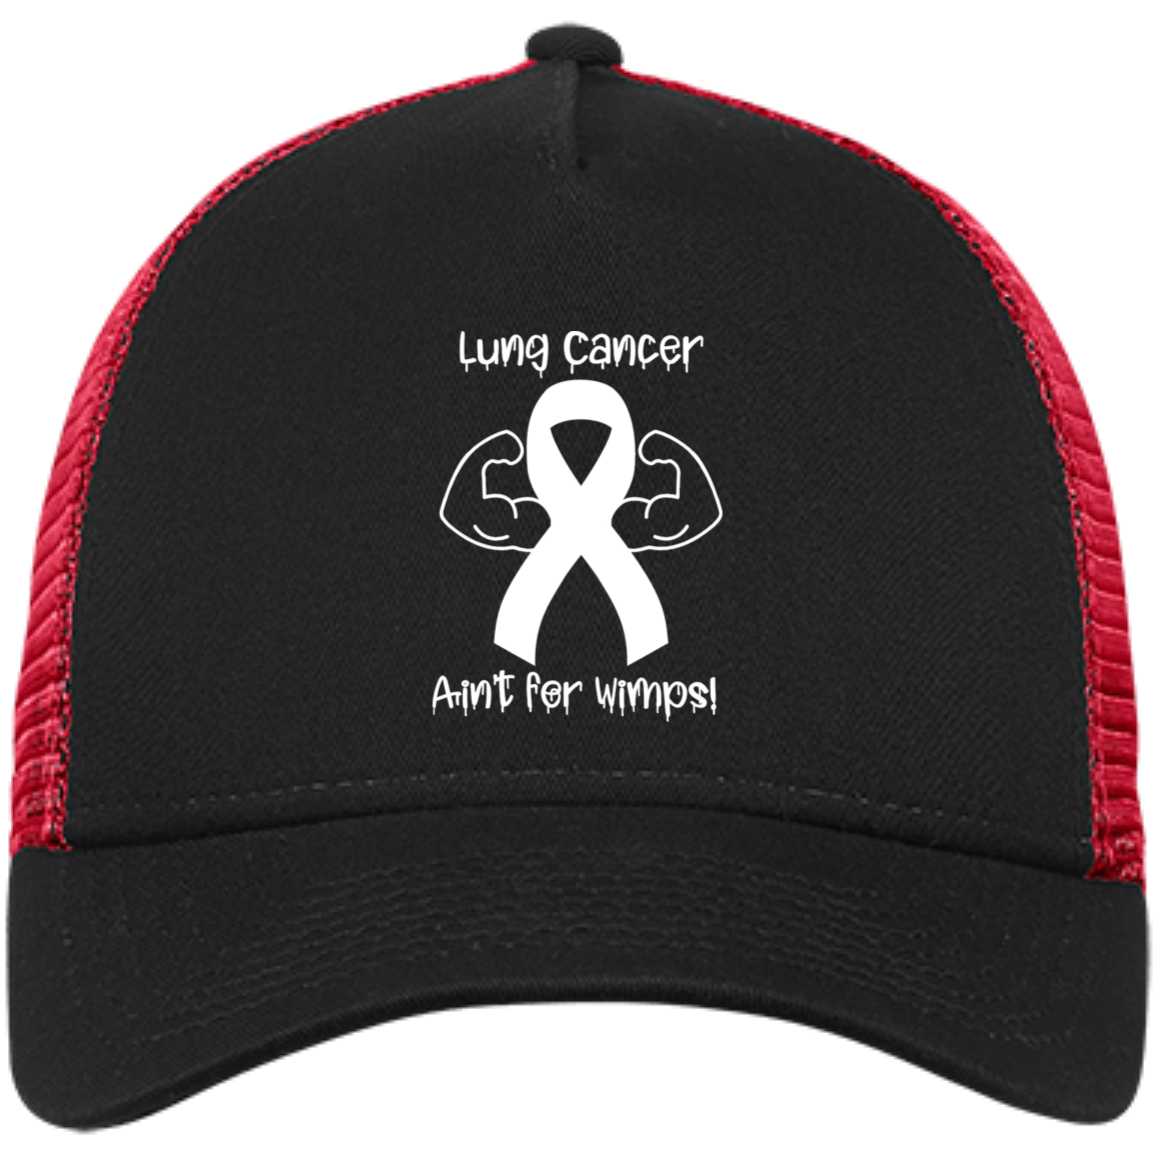 LC Wimps Embroidered Snapback Trucker Cap